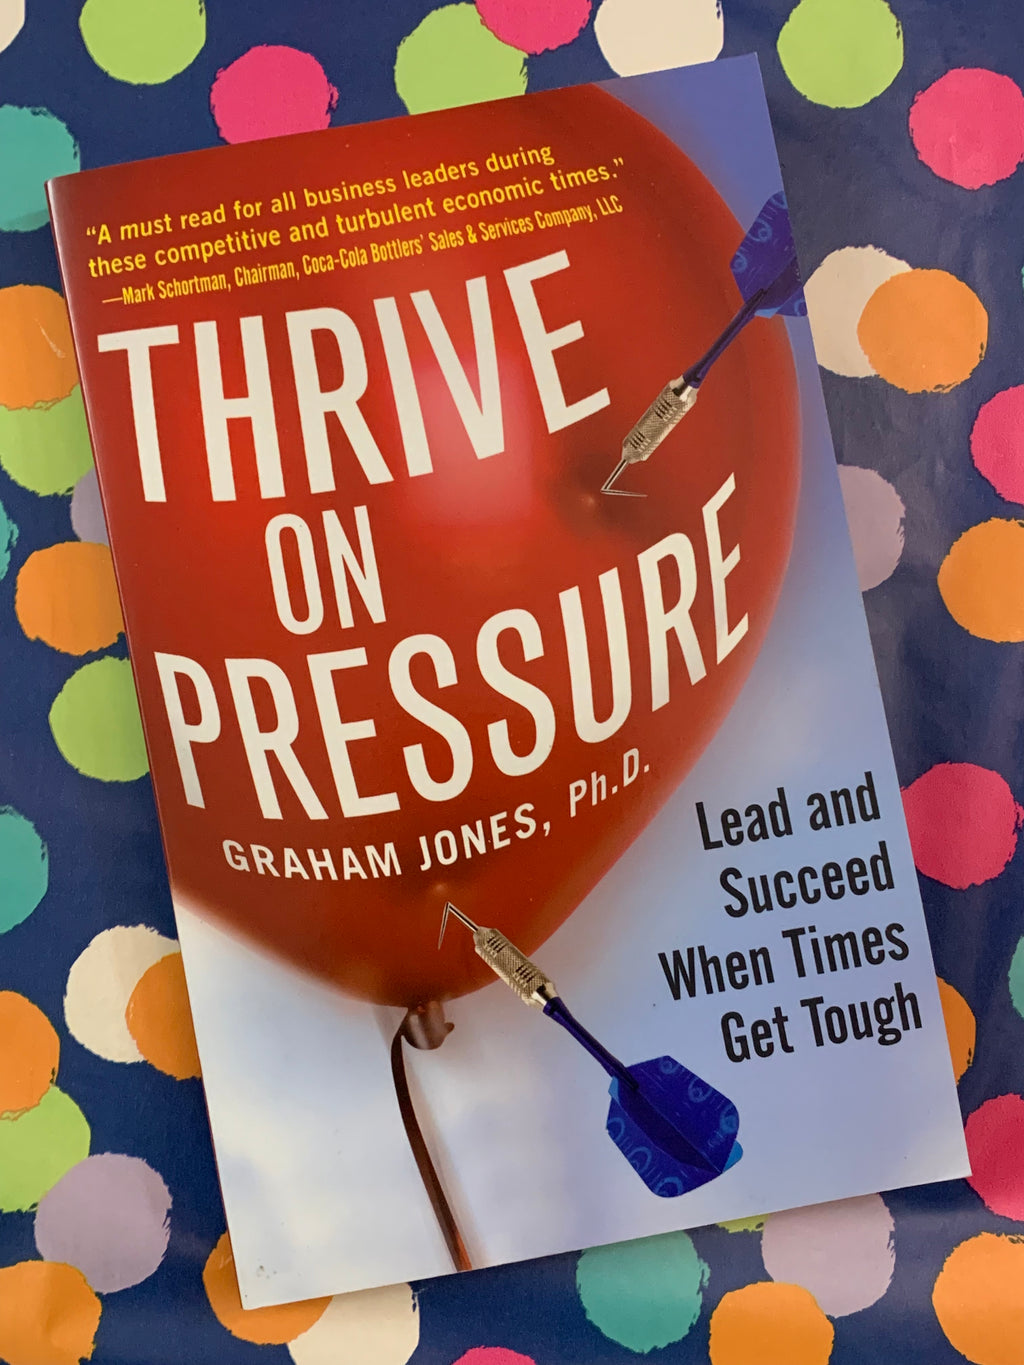 Thrive on Pressure: Lead and Succeed When Times Get Tough- By Graham Jones, Ph. D.